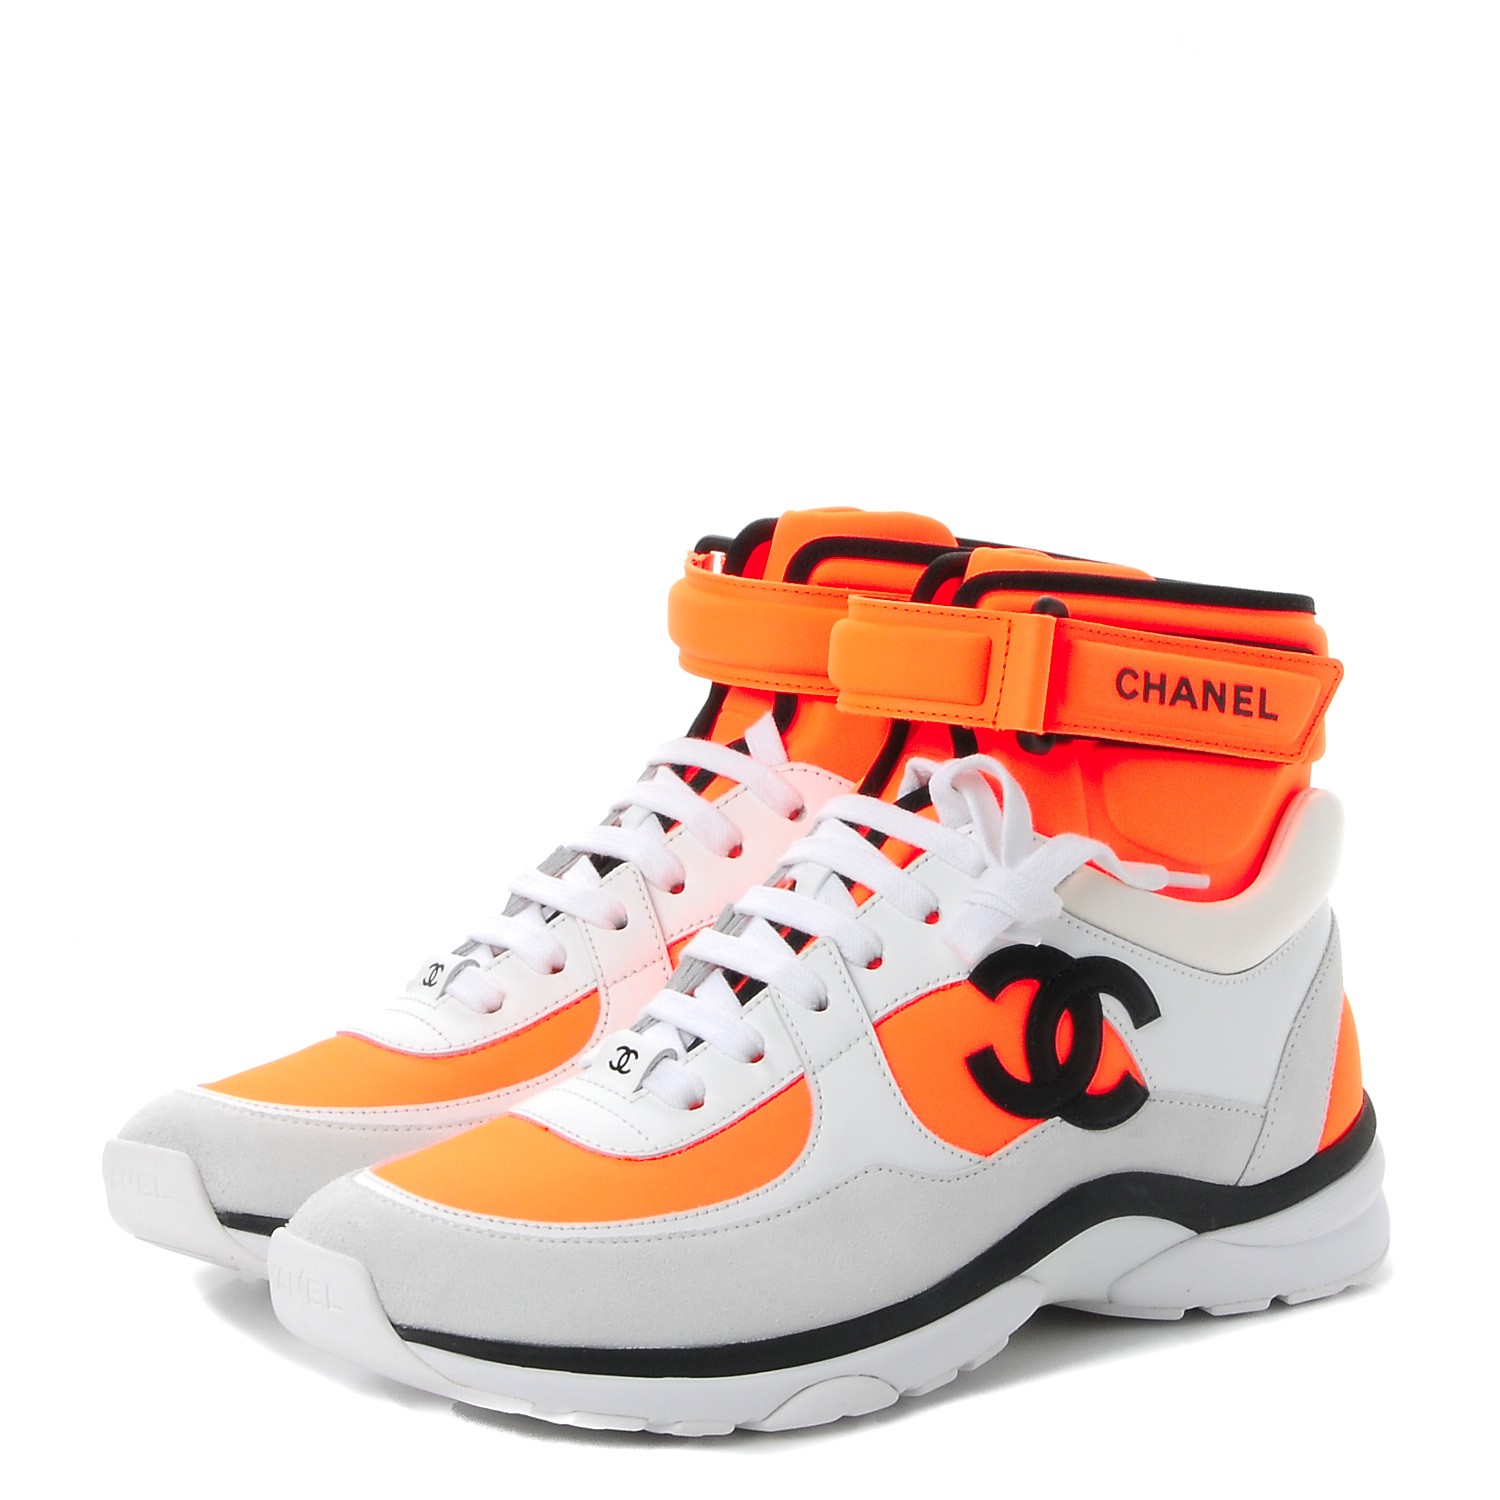 orange and black chanel sneakers